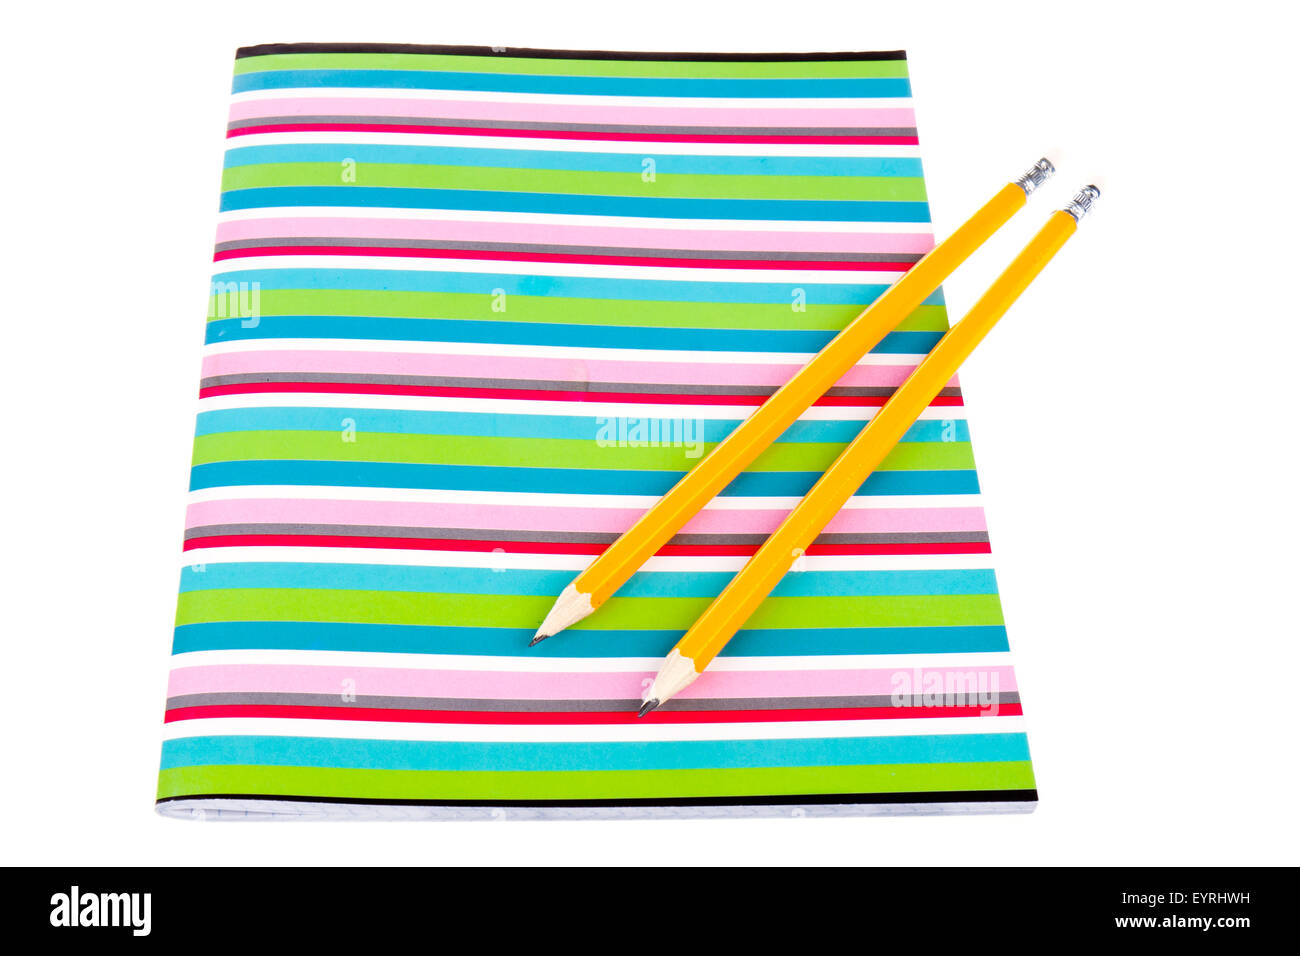 Colorful exercise book with wooden pencils Stock Photo